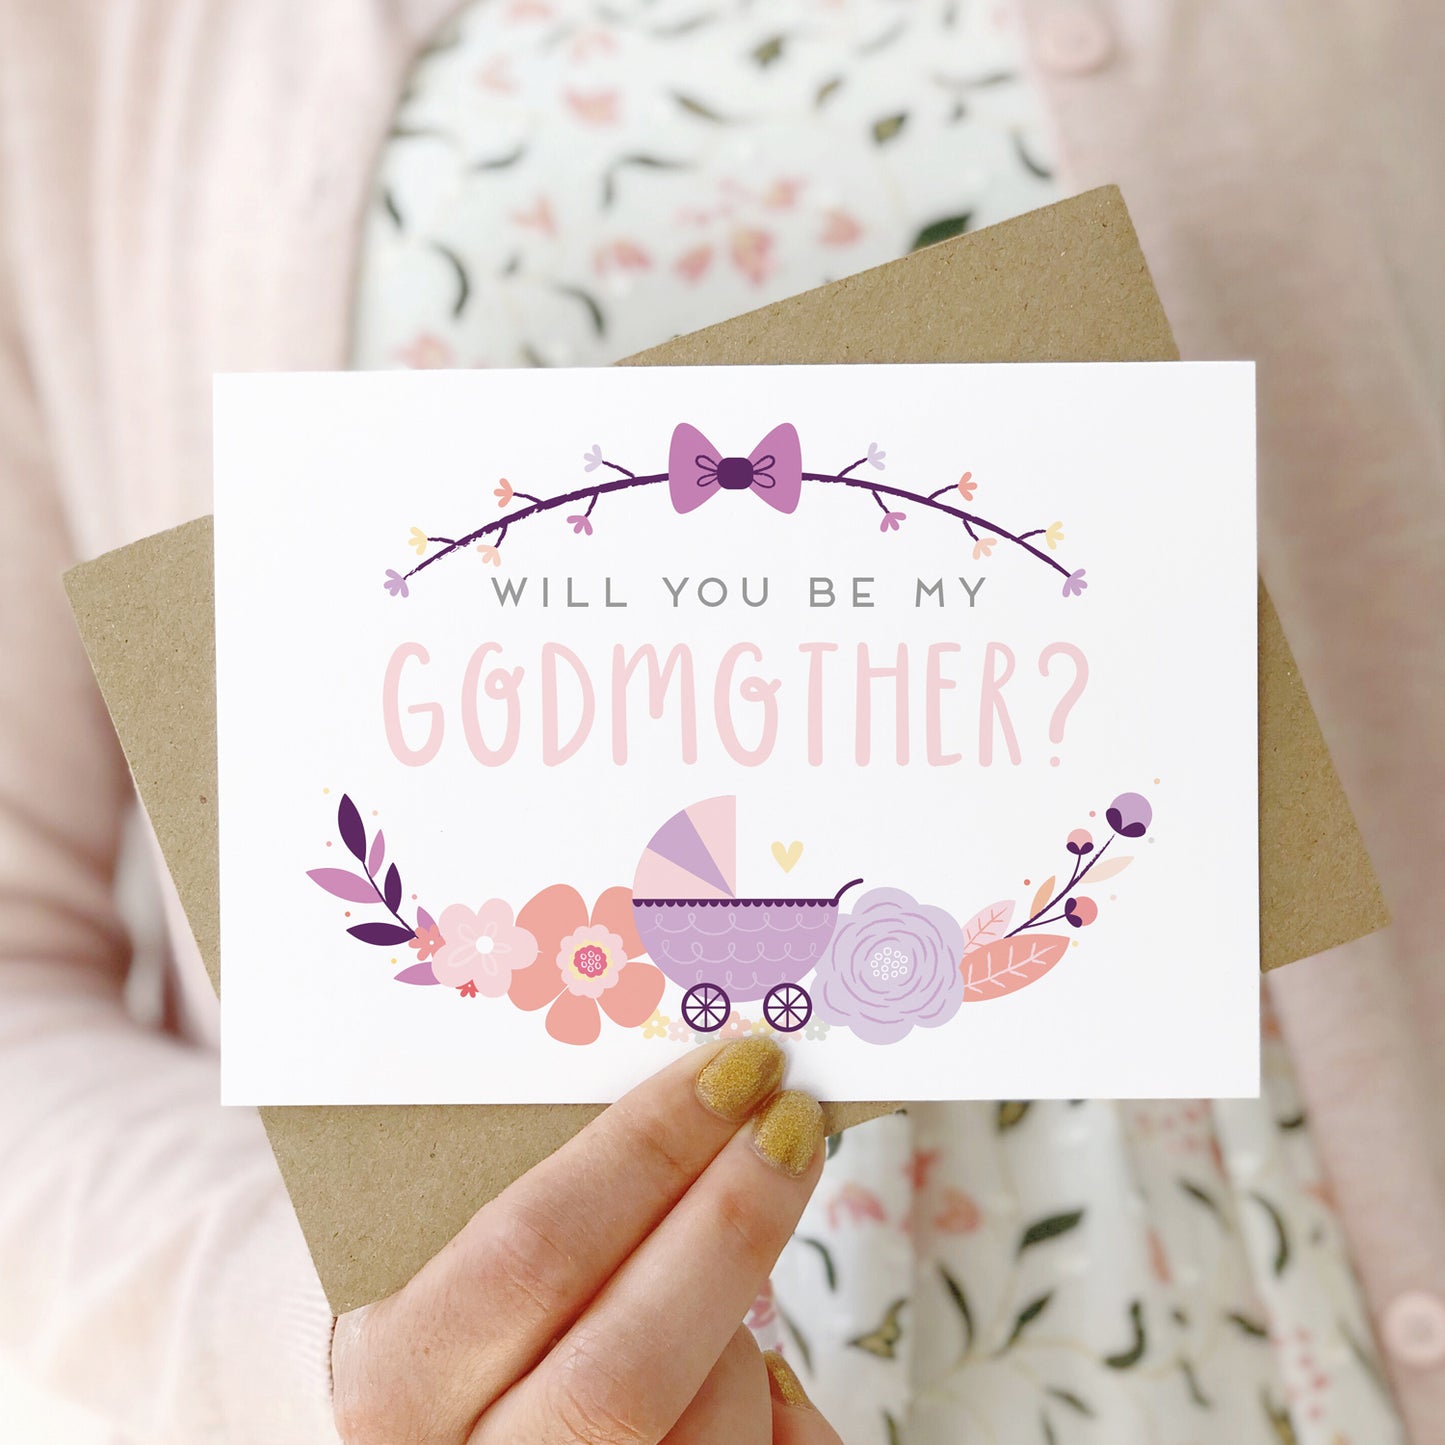 A will you be my godmother card being held in front of a white dress and pink cardigan. The design features a pram, simple florals and the all important question. This is the purple palette.